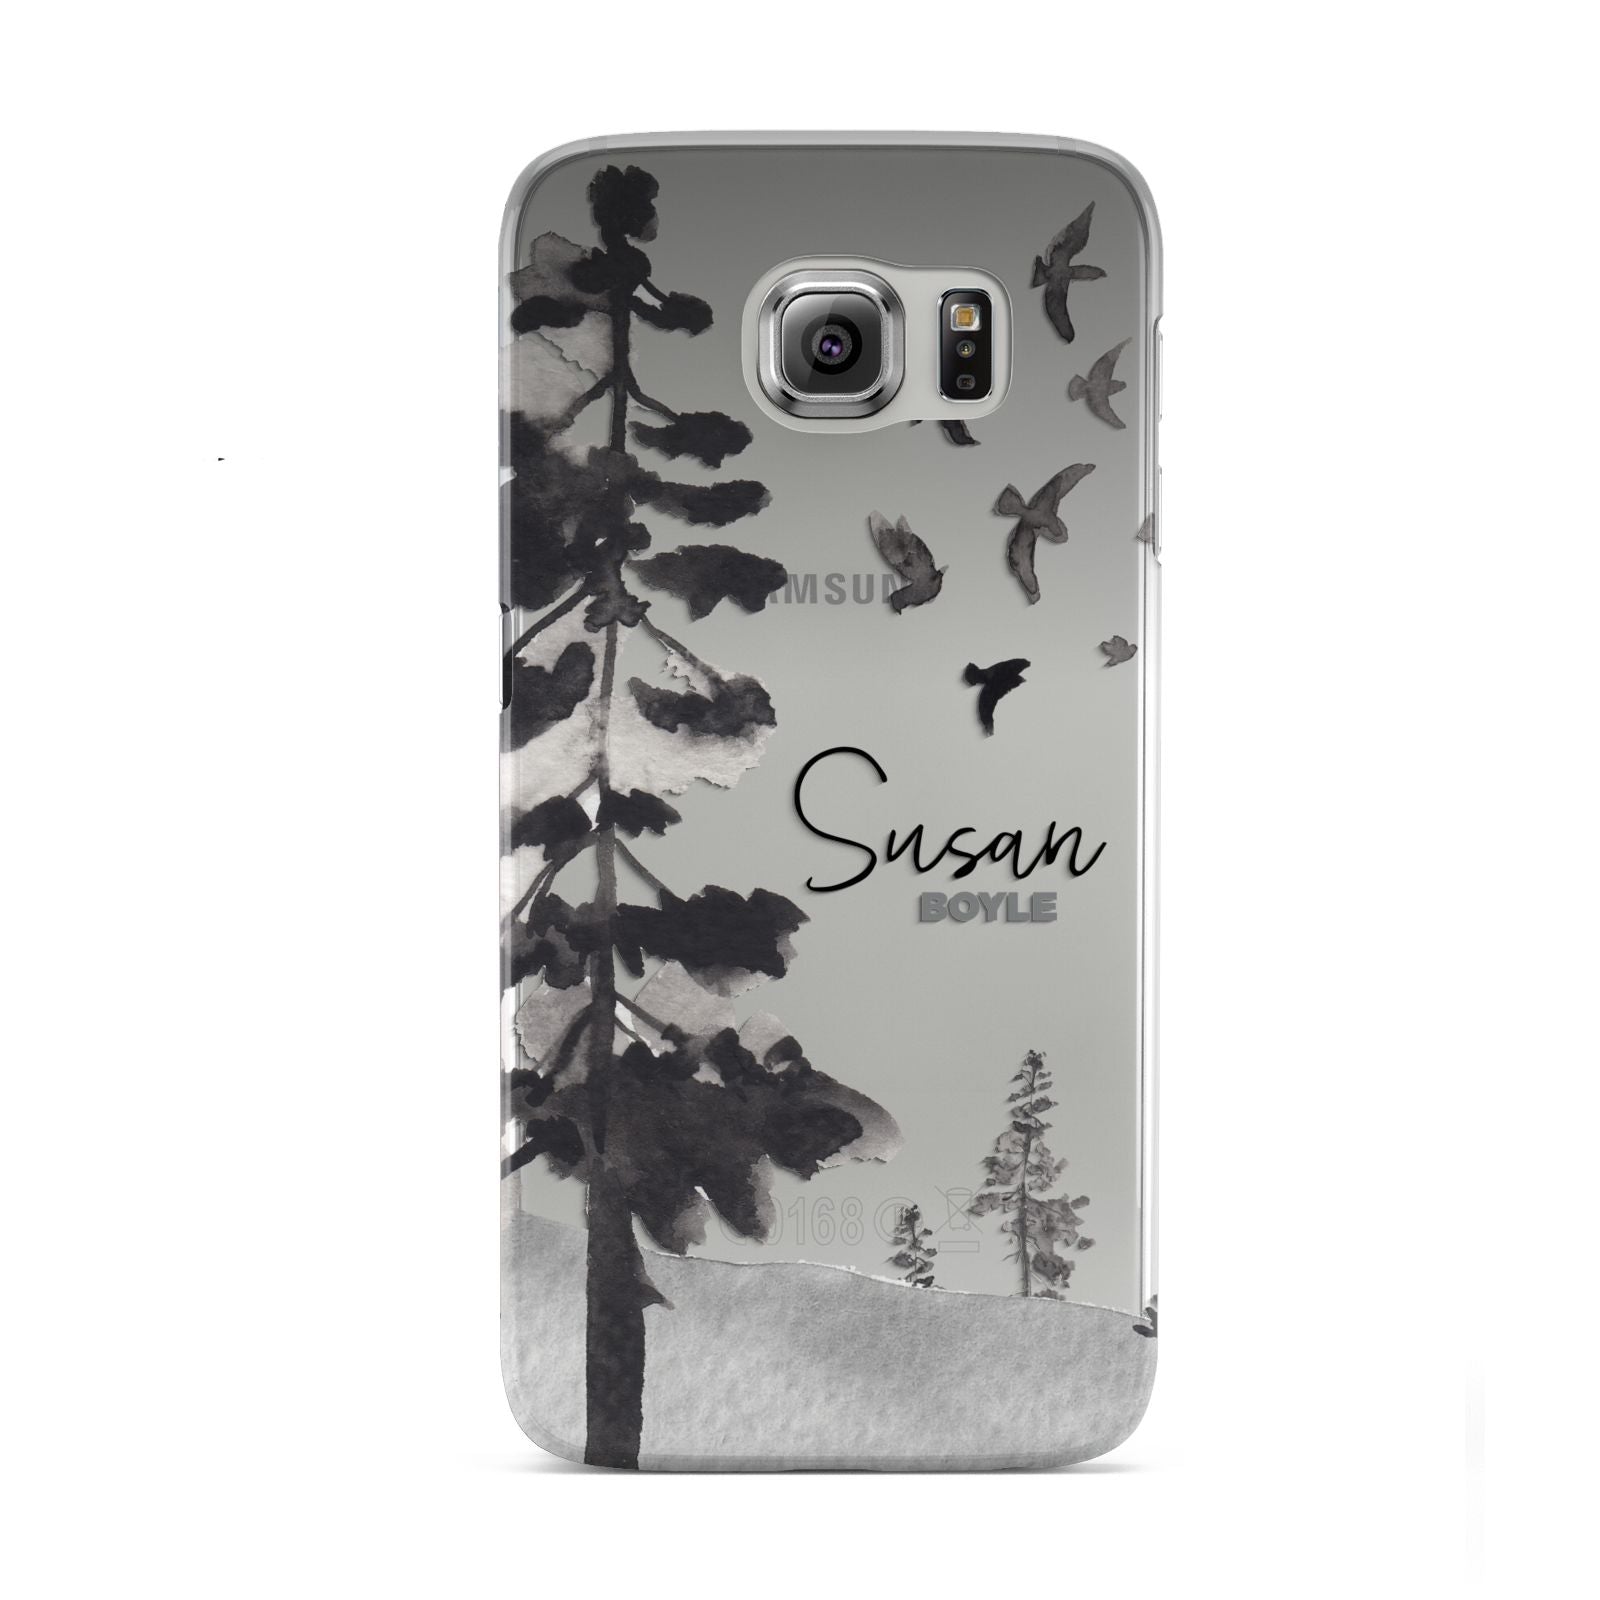 Personalised Monochrome Forest Samsung Galaxy S6 Case